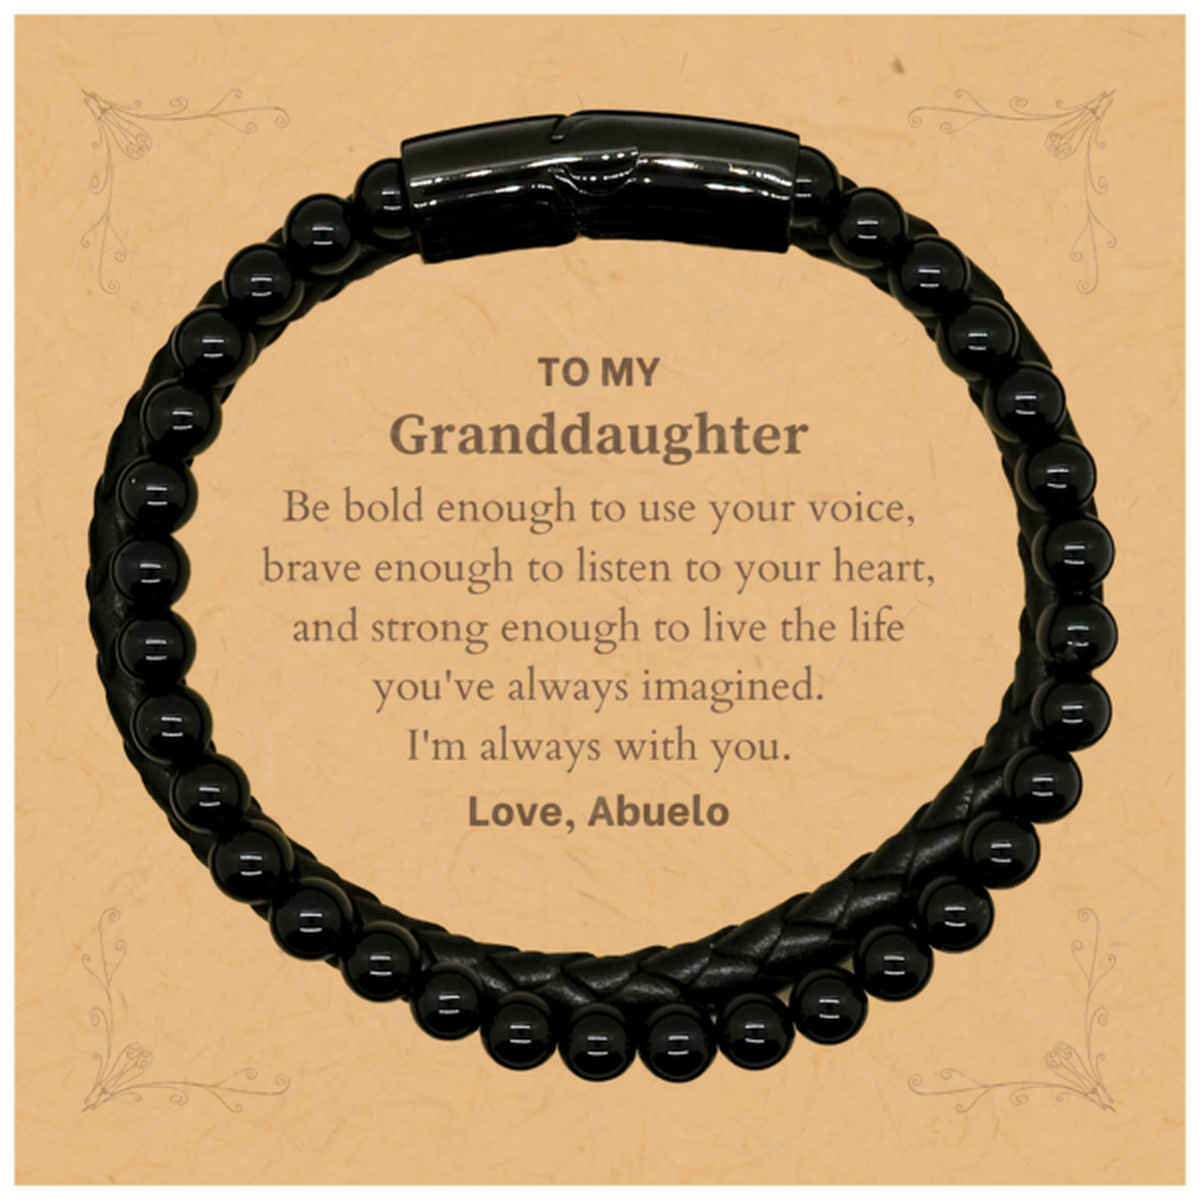 Keepsake Granddaughter Stone Leather Bracelets Gift Idea Graduation Christmas Birthday Granddaughter from Abuelo, Granddaughter Be bold enough to use your voice, brave enough to listen to your heart. Love, Abuelo